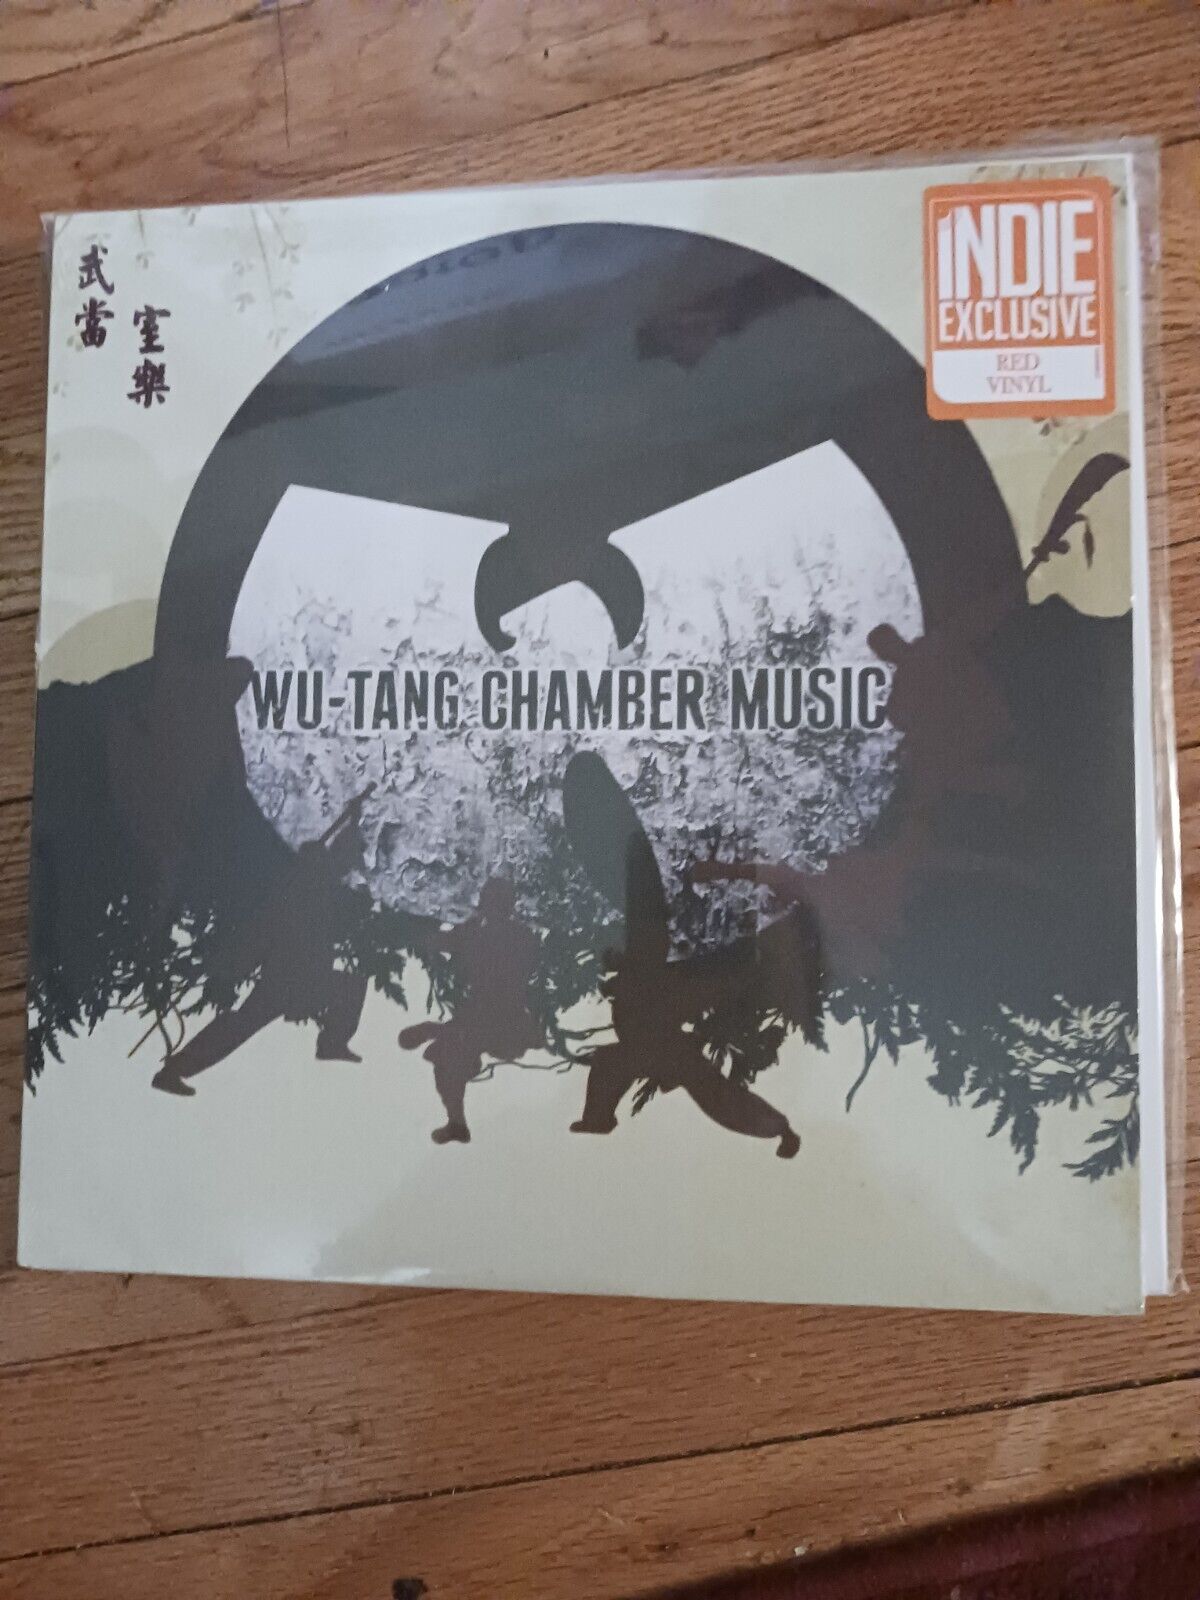 WU-TANG Chamber Music LP NEW Rap Indie X Limited Red Vinyl Hip Hop MNRK Hardcore